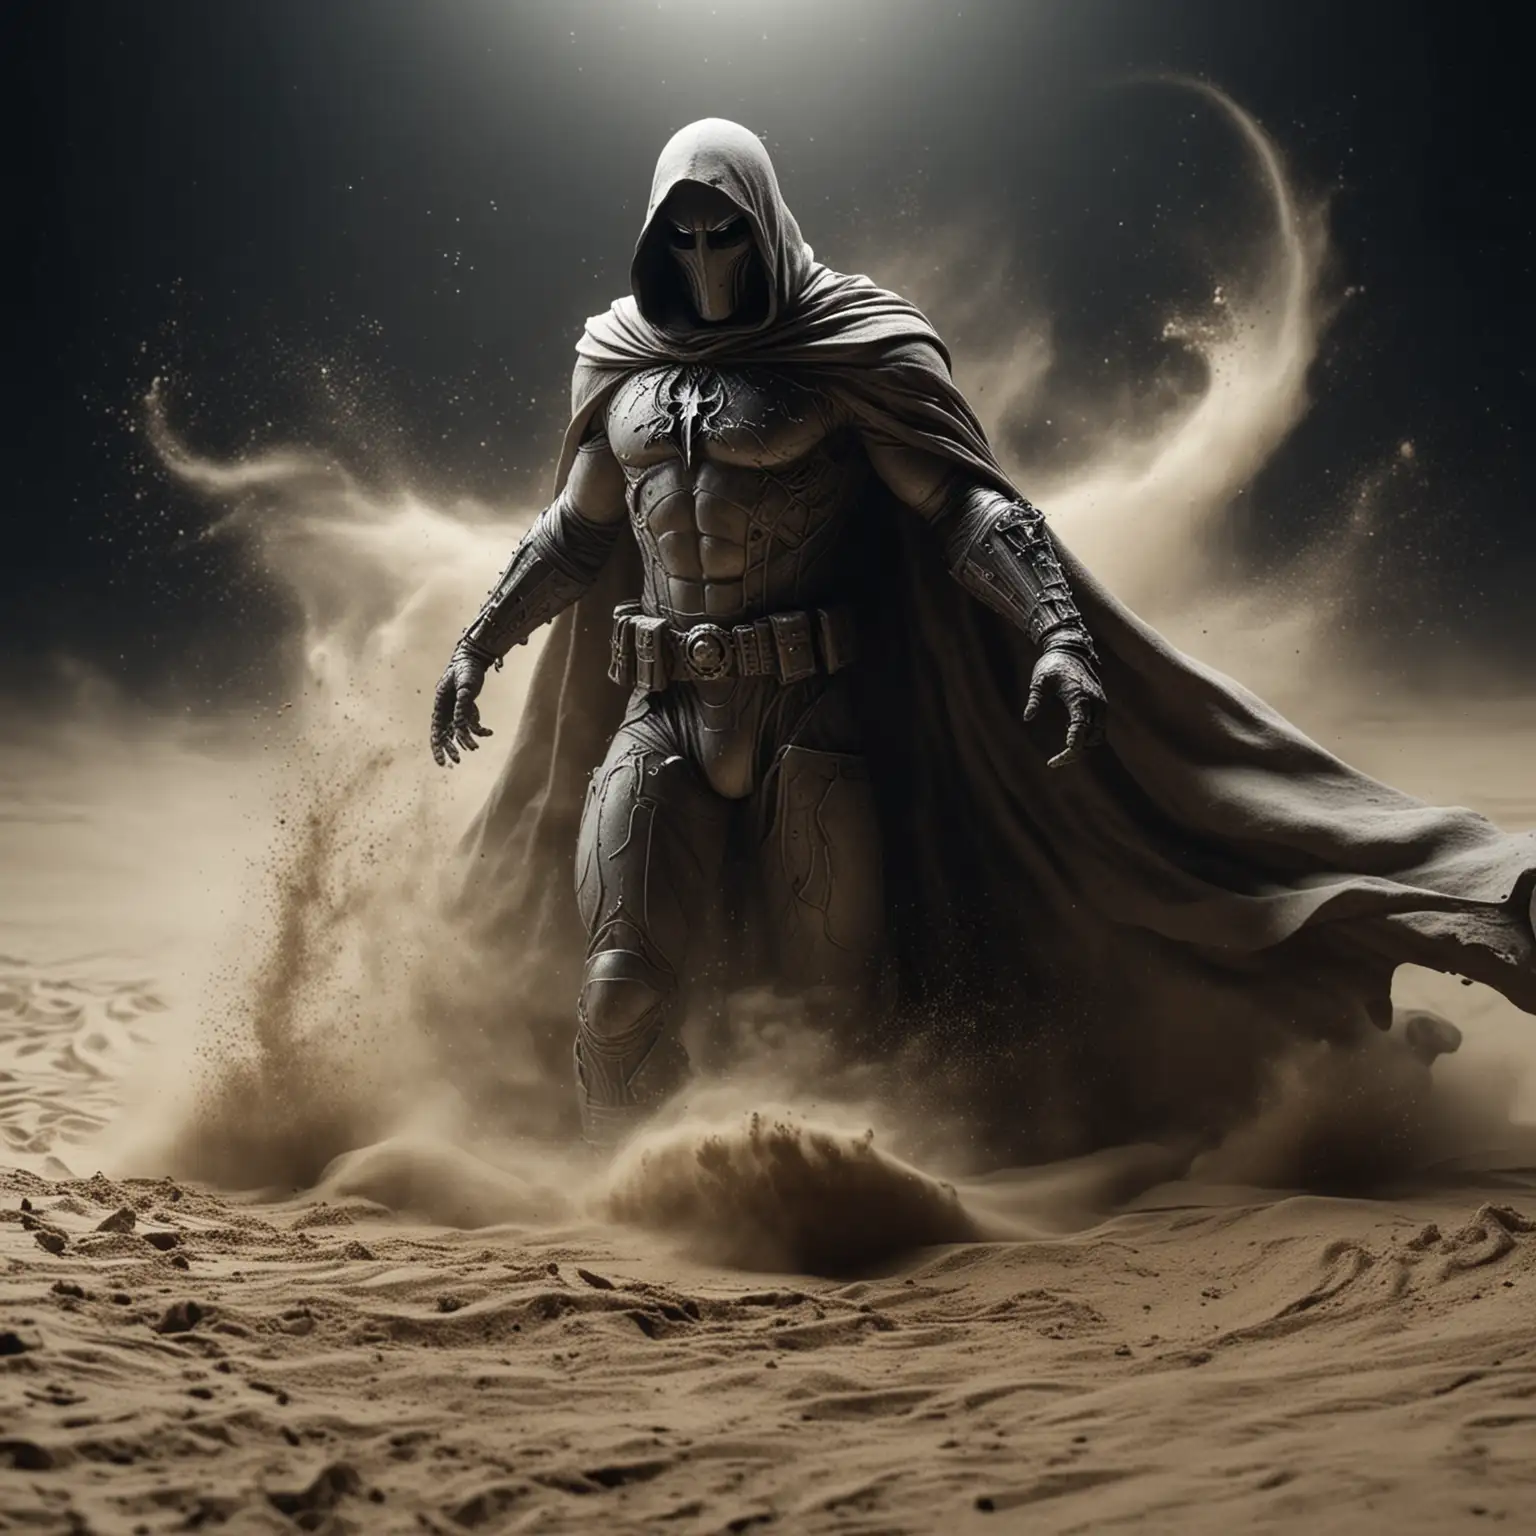 Moon Knight Dissolving into Swirling Sand Cinematic Portrait